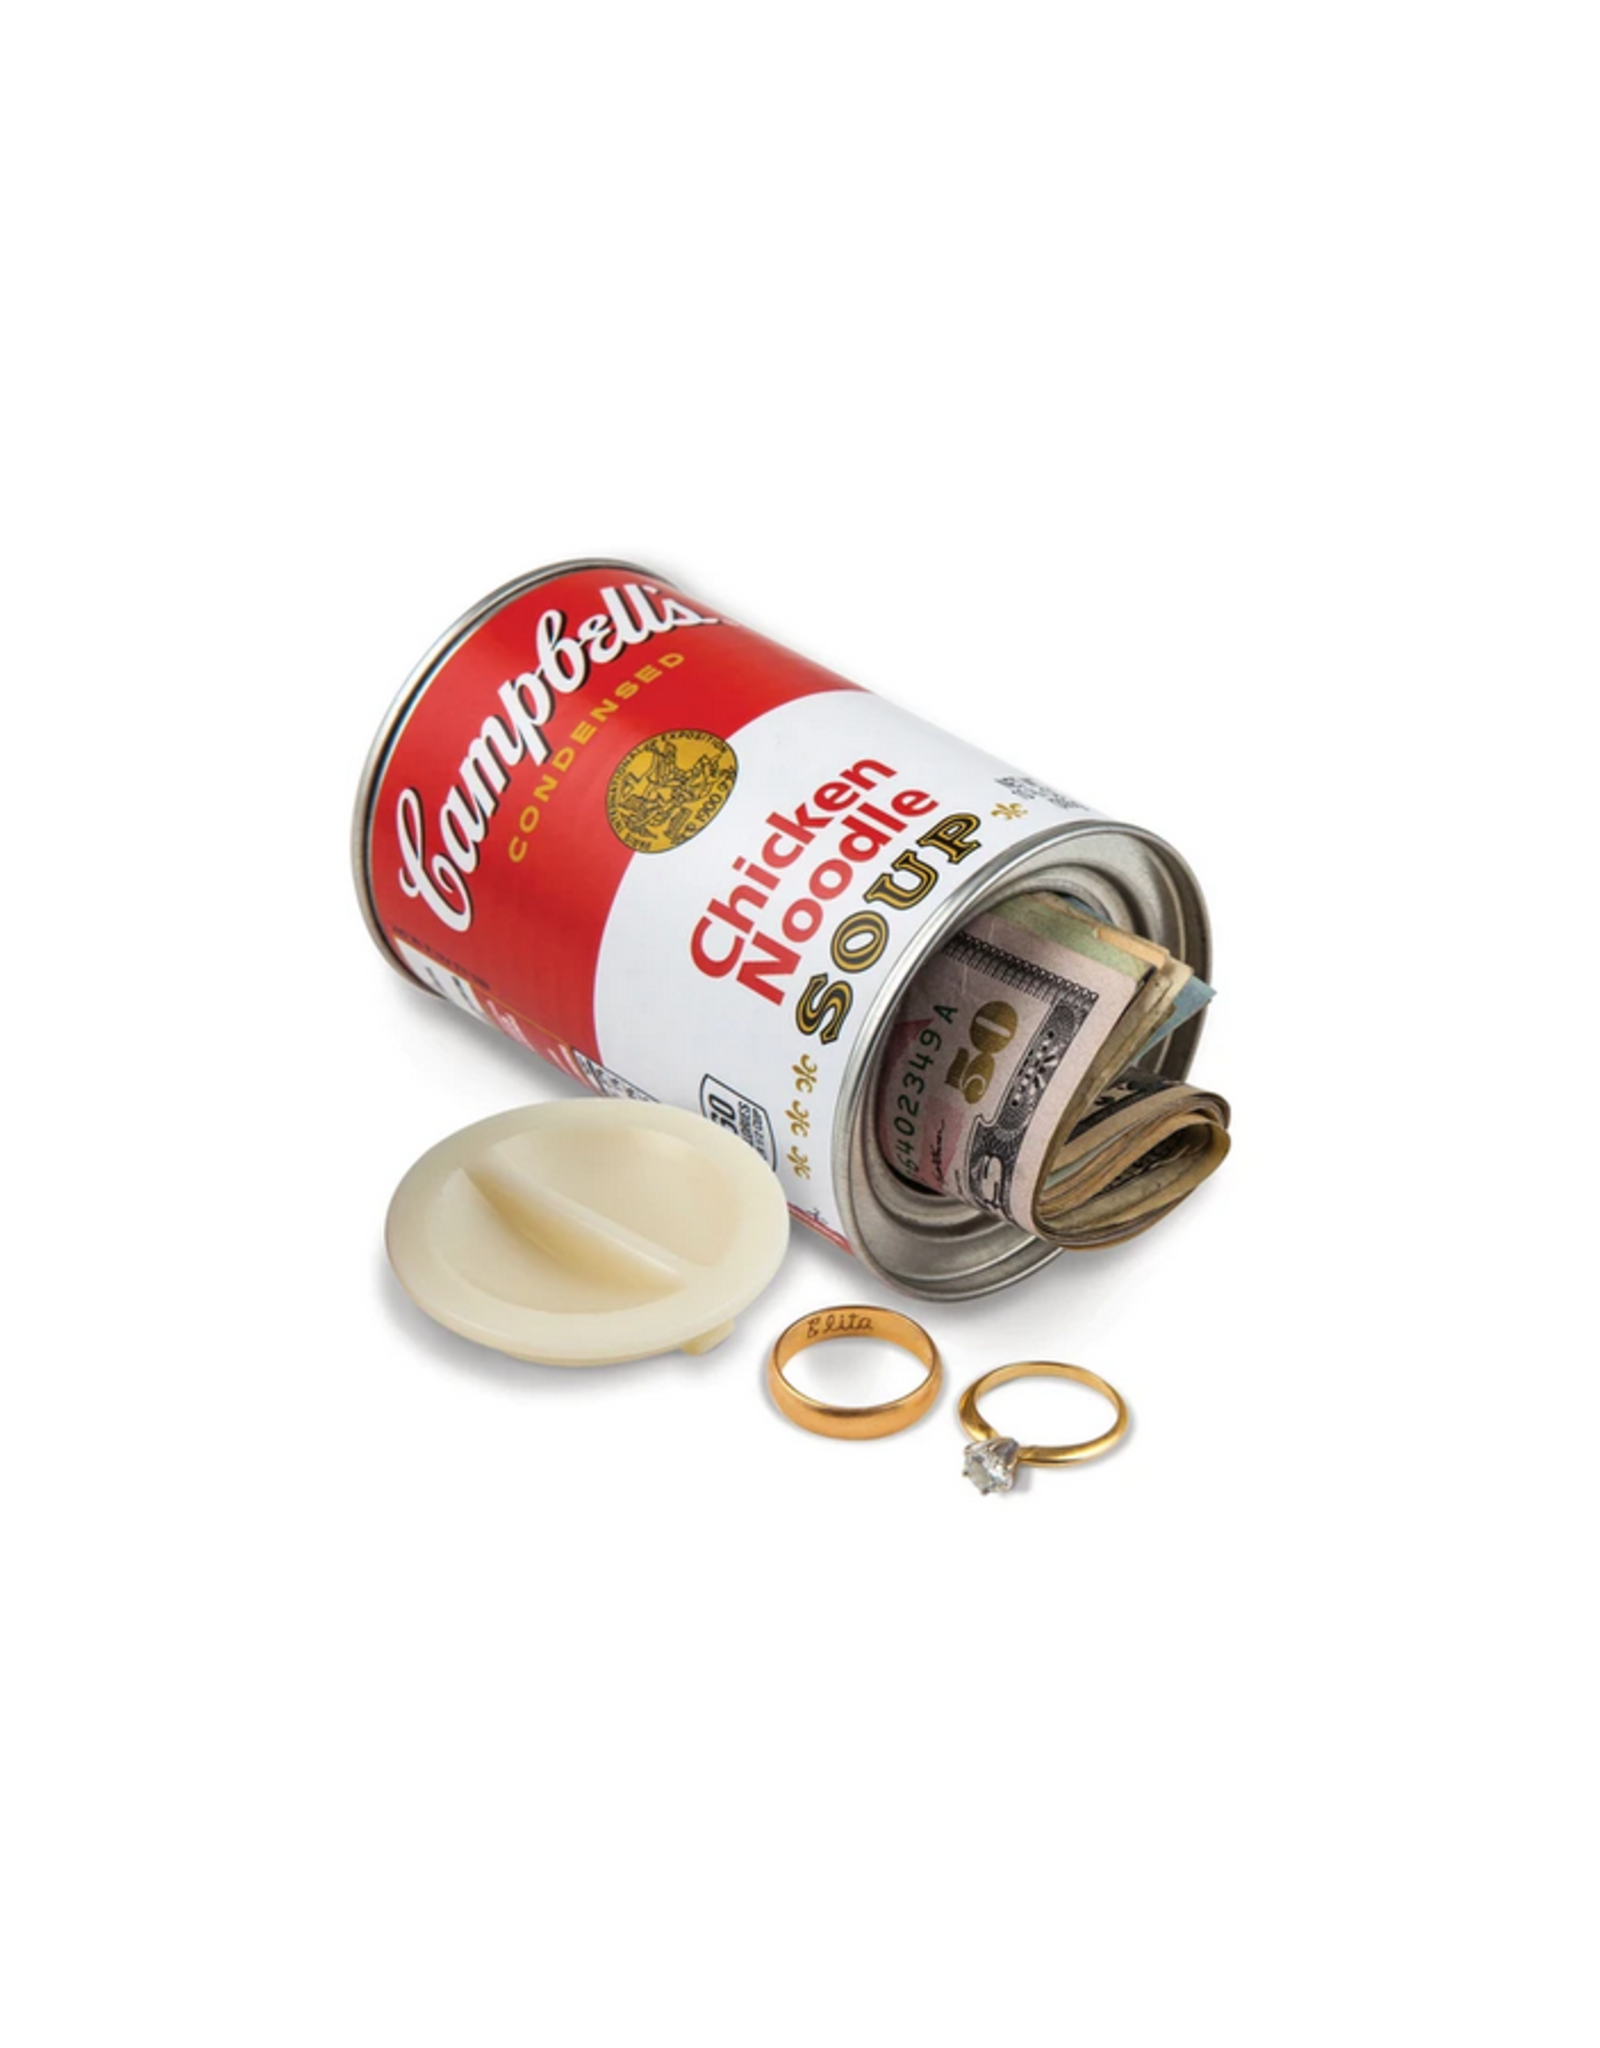 Campbell's Chicken Noodle Soup Can Safe